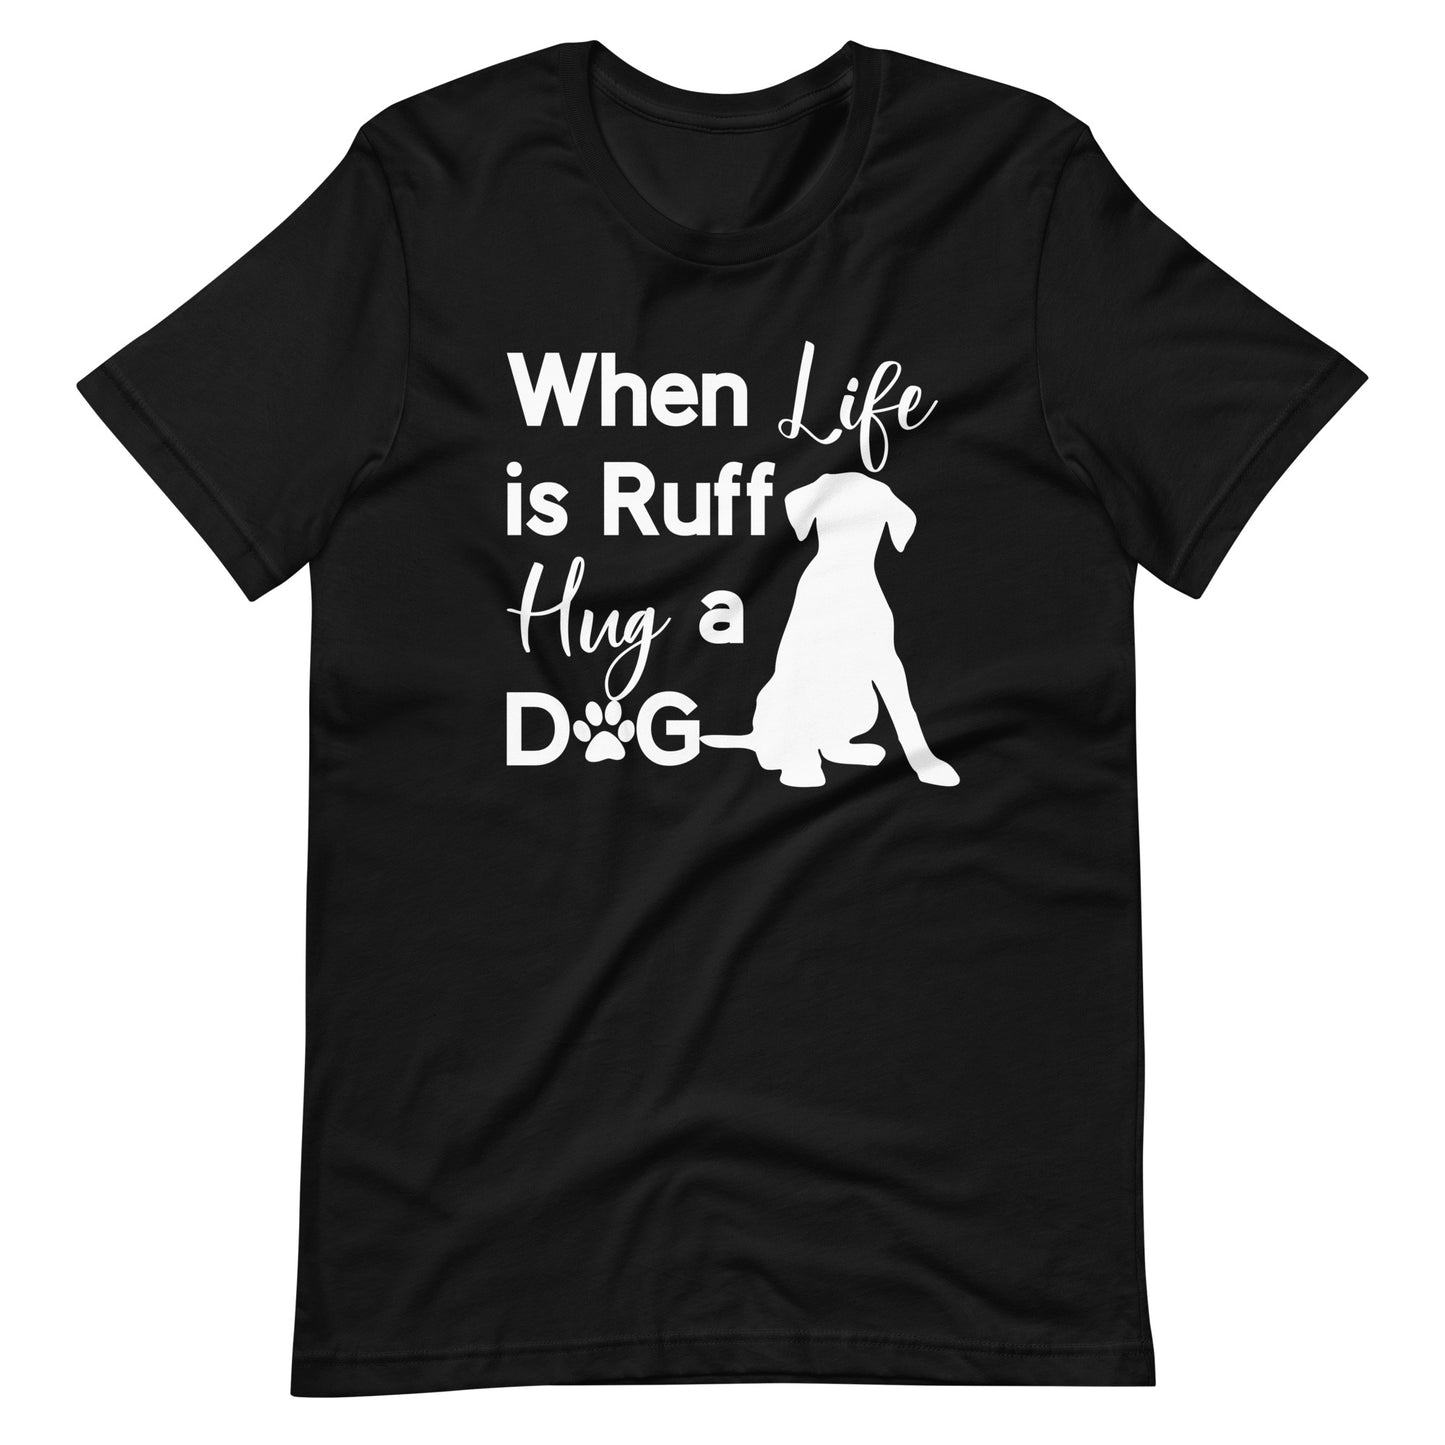 When Life is Ruff Hug a Dog T-Shirt for Dog Lovers